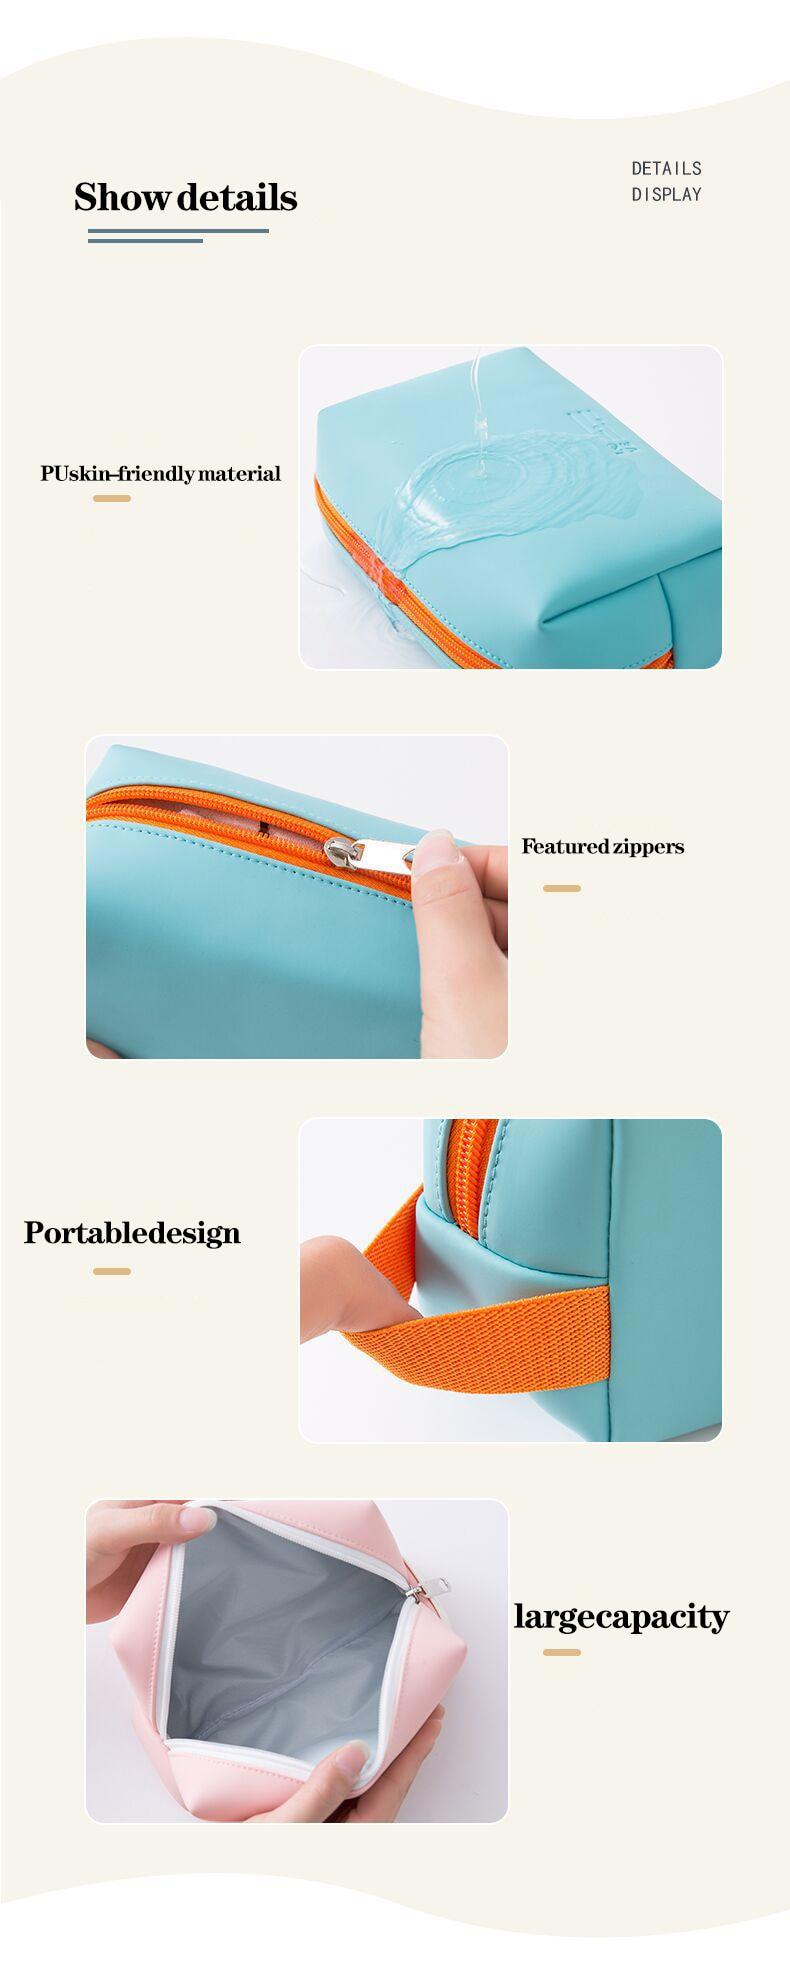 Cute Portable Make-Up Storage Bag - Try Modest Limited 